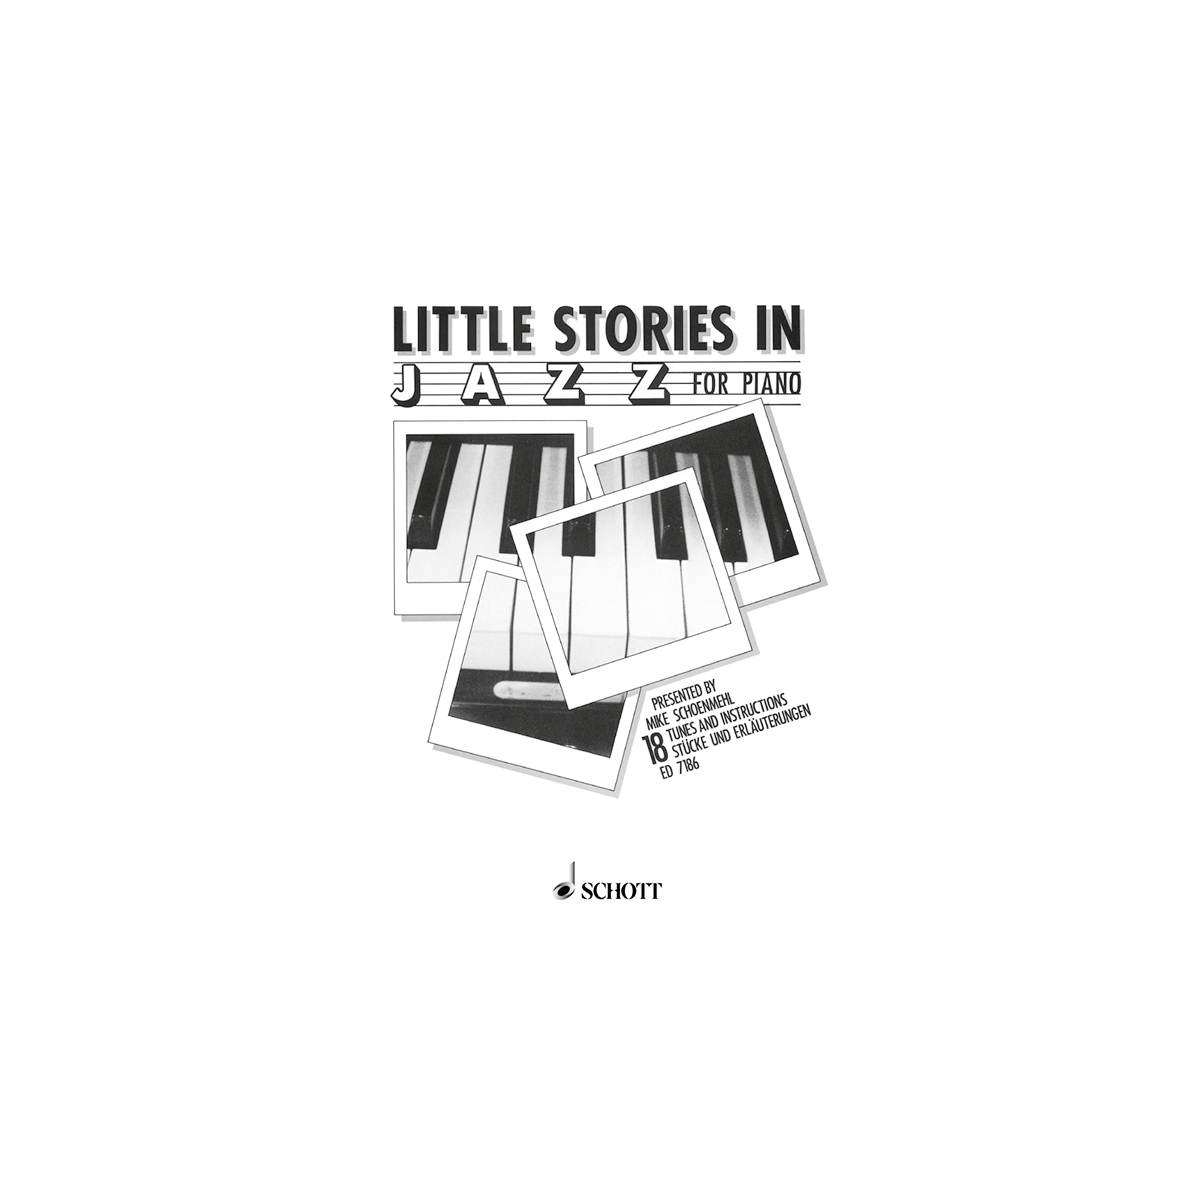 Little Stories in Jazz for Piano